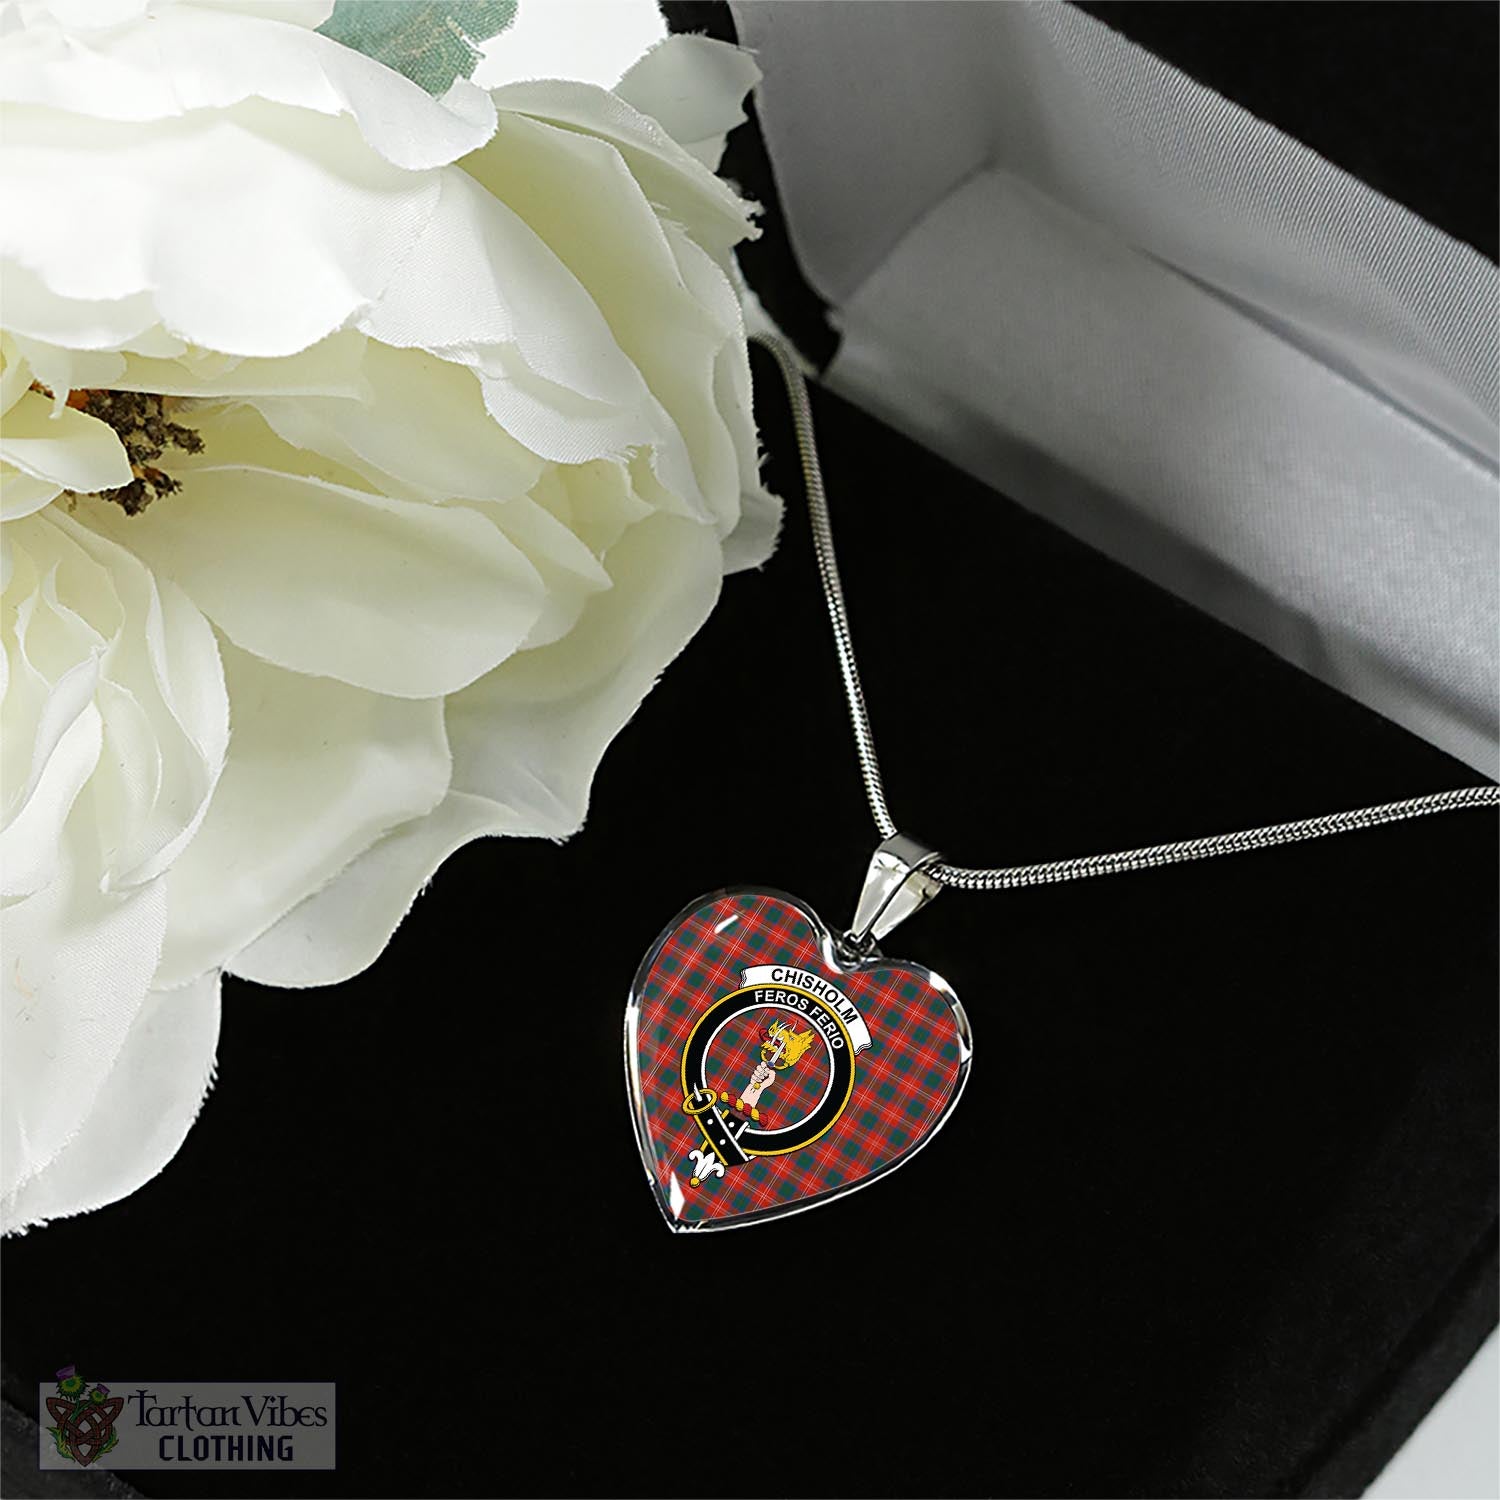 Tartan Vibes Clothing Chisholm Ancient Tartan Heart Necklace with Family Crest